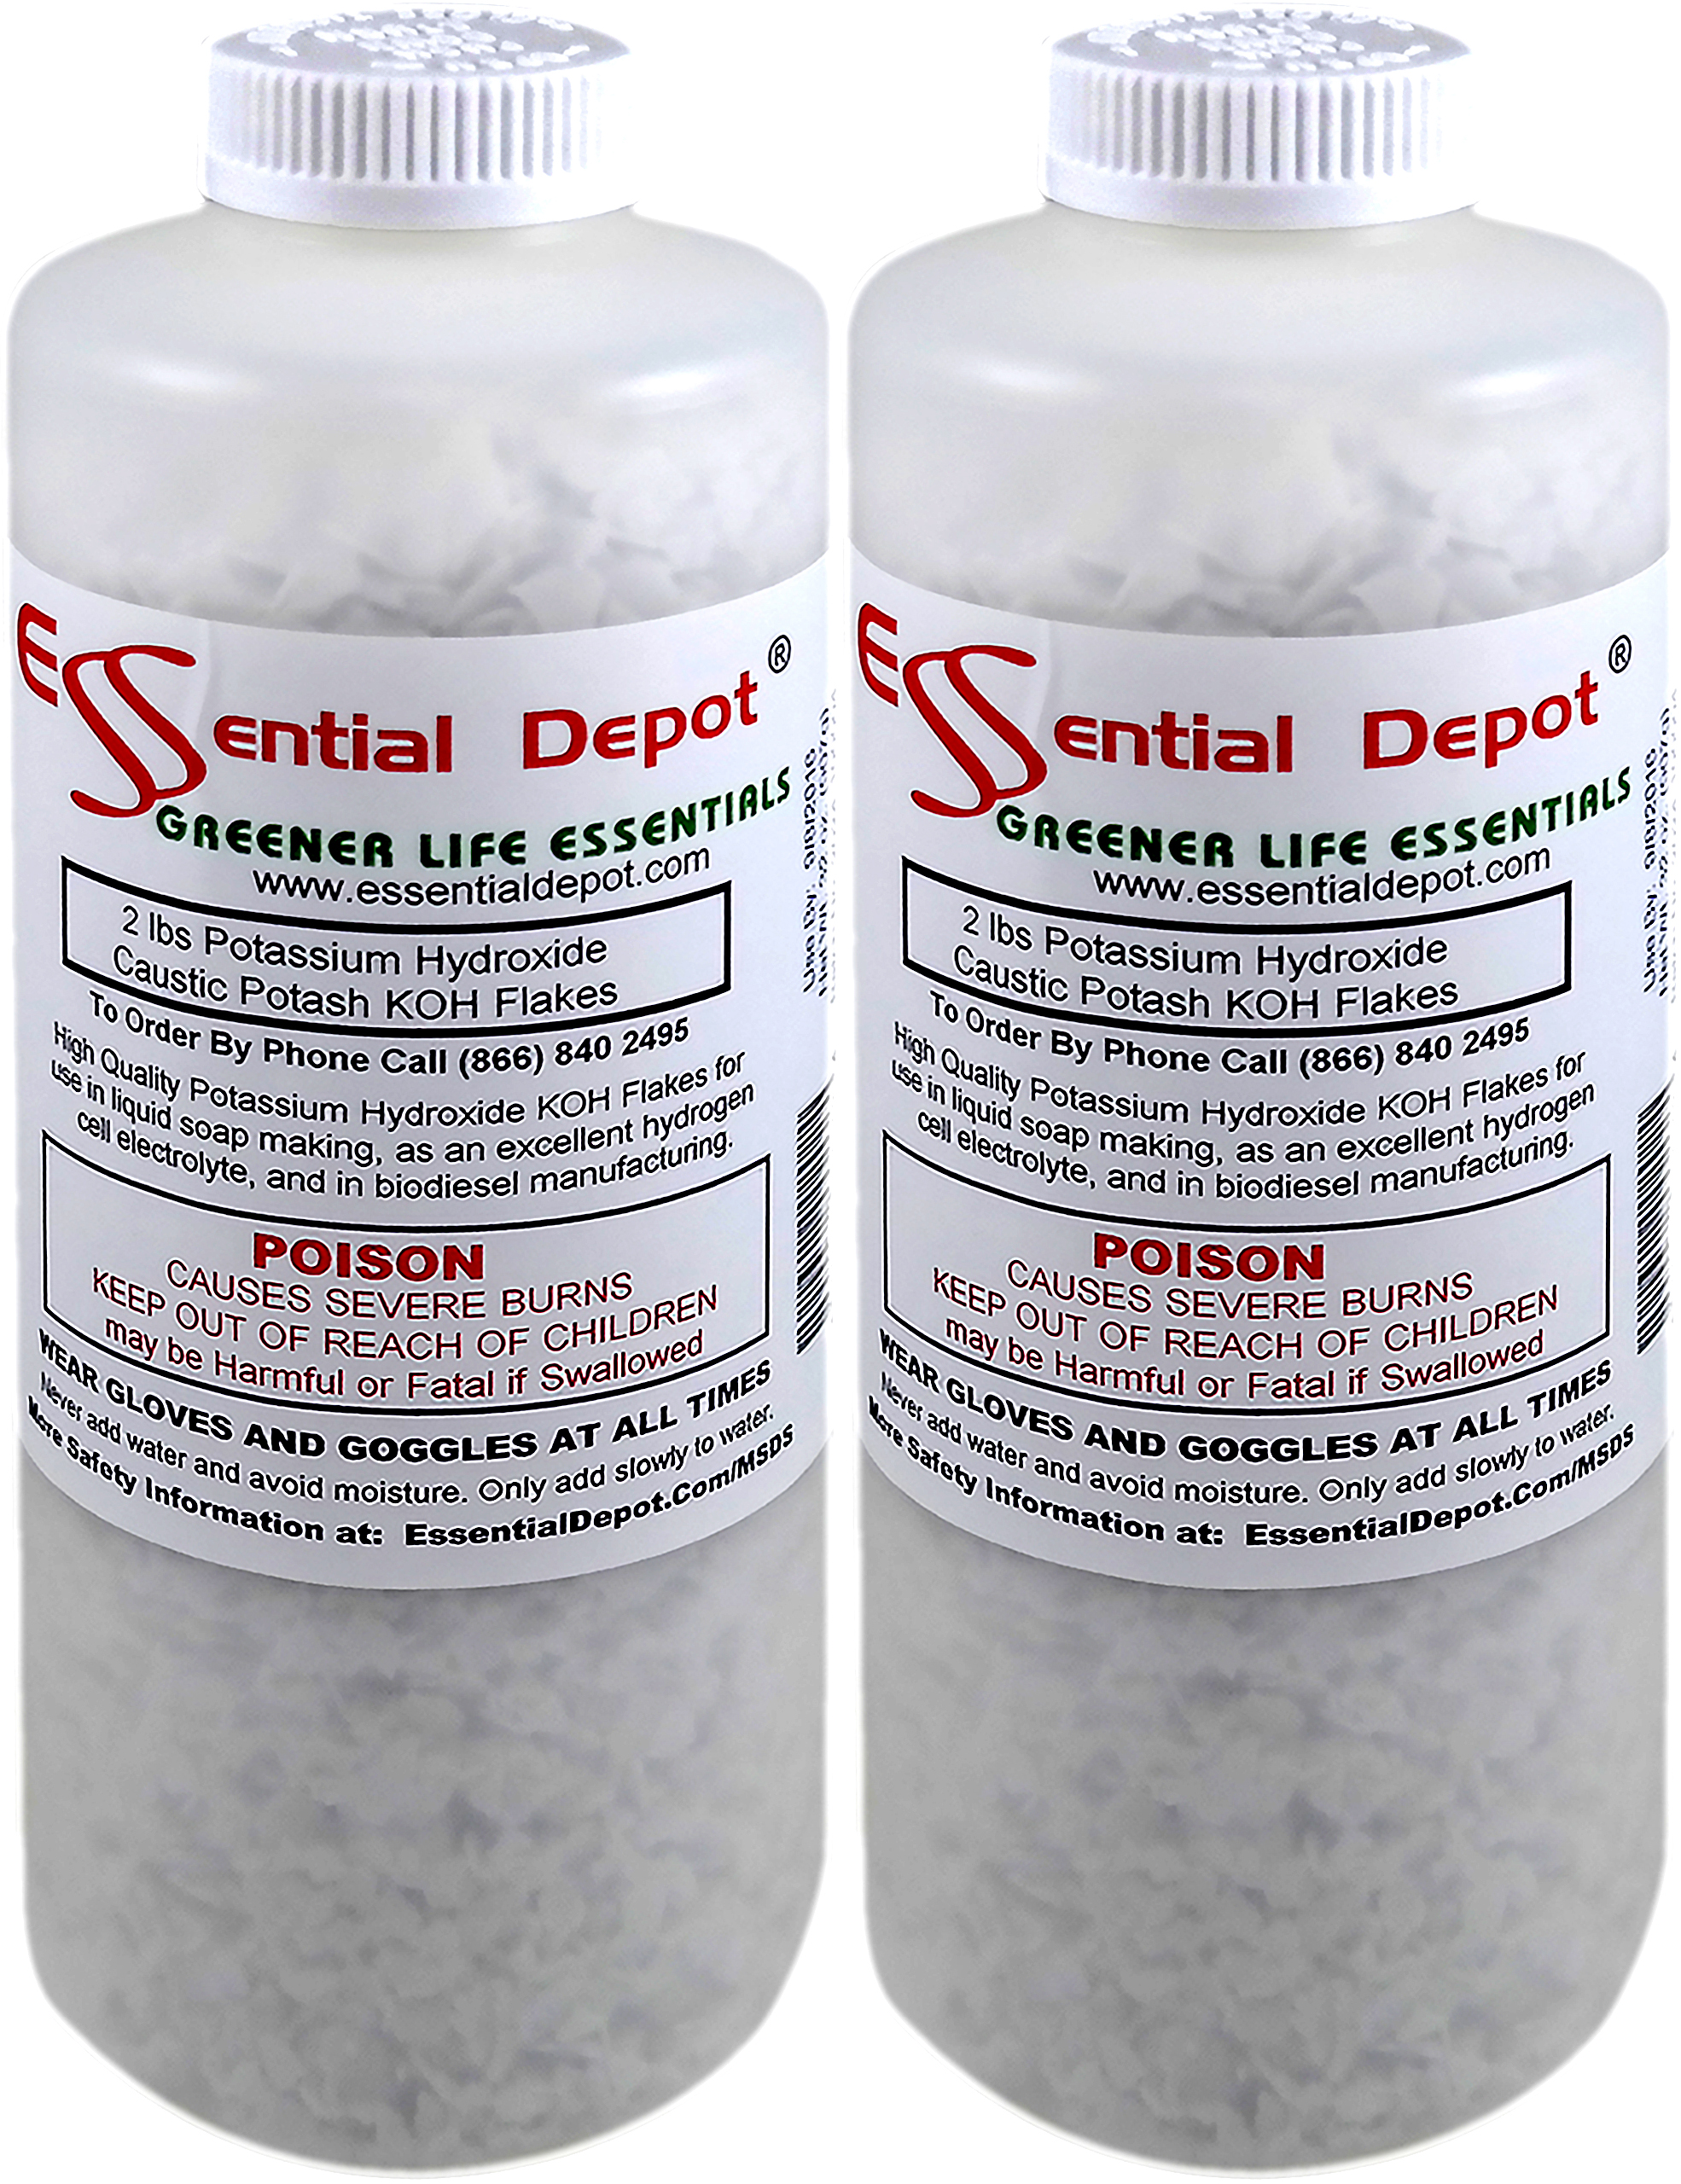 What is Potassium Hydroxide?